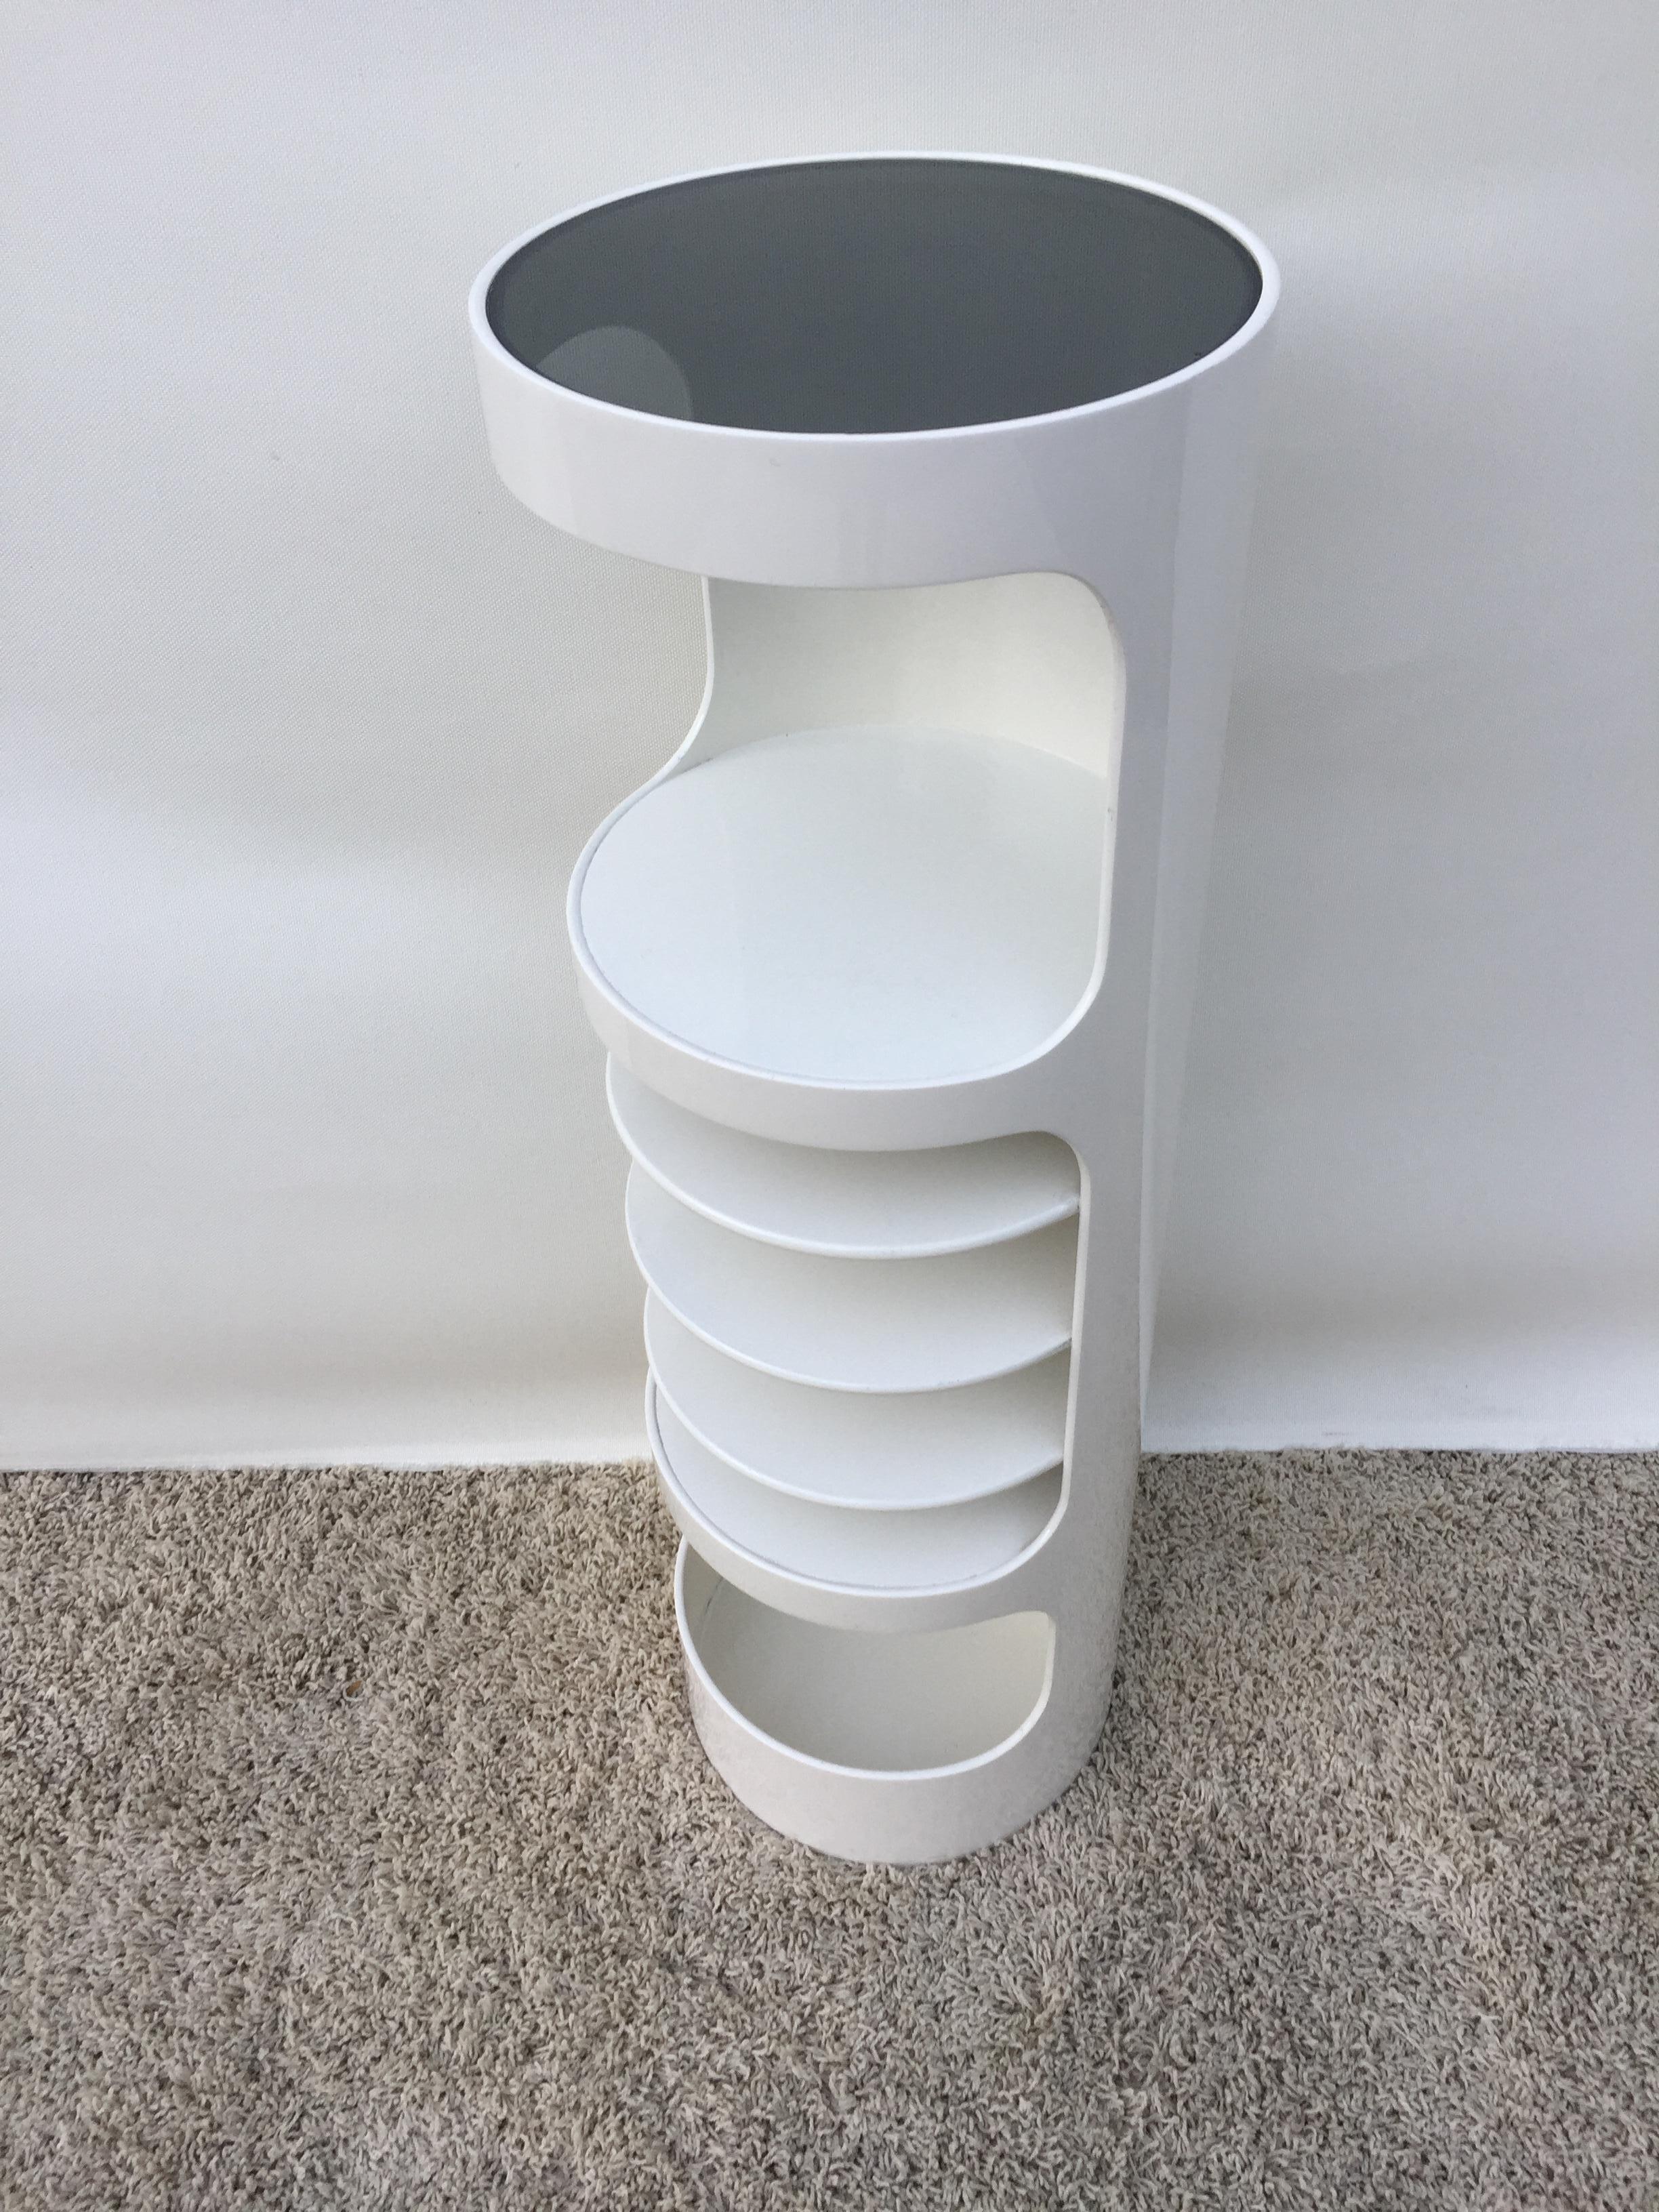 Holland Co., tall white lacquer tiered stand table compartments, great corner piece with dark glass top. Storage, pedestal for towels unique.